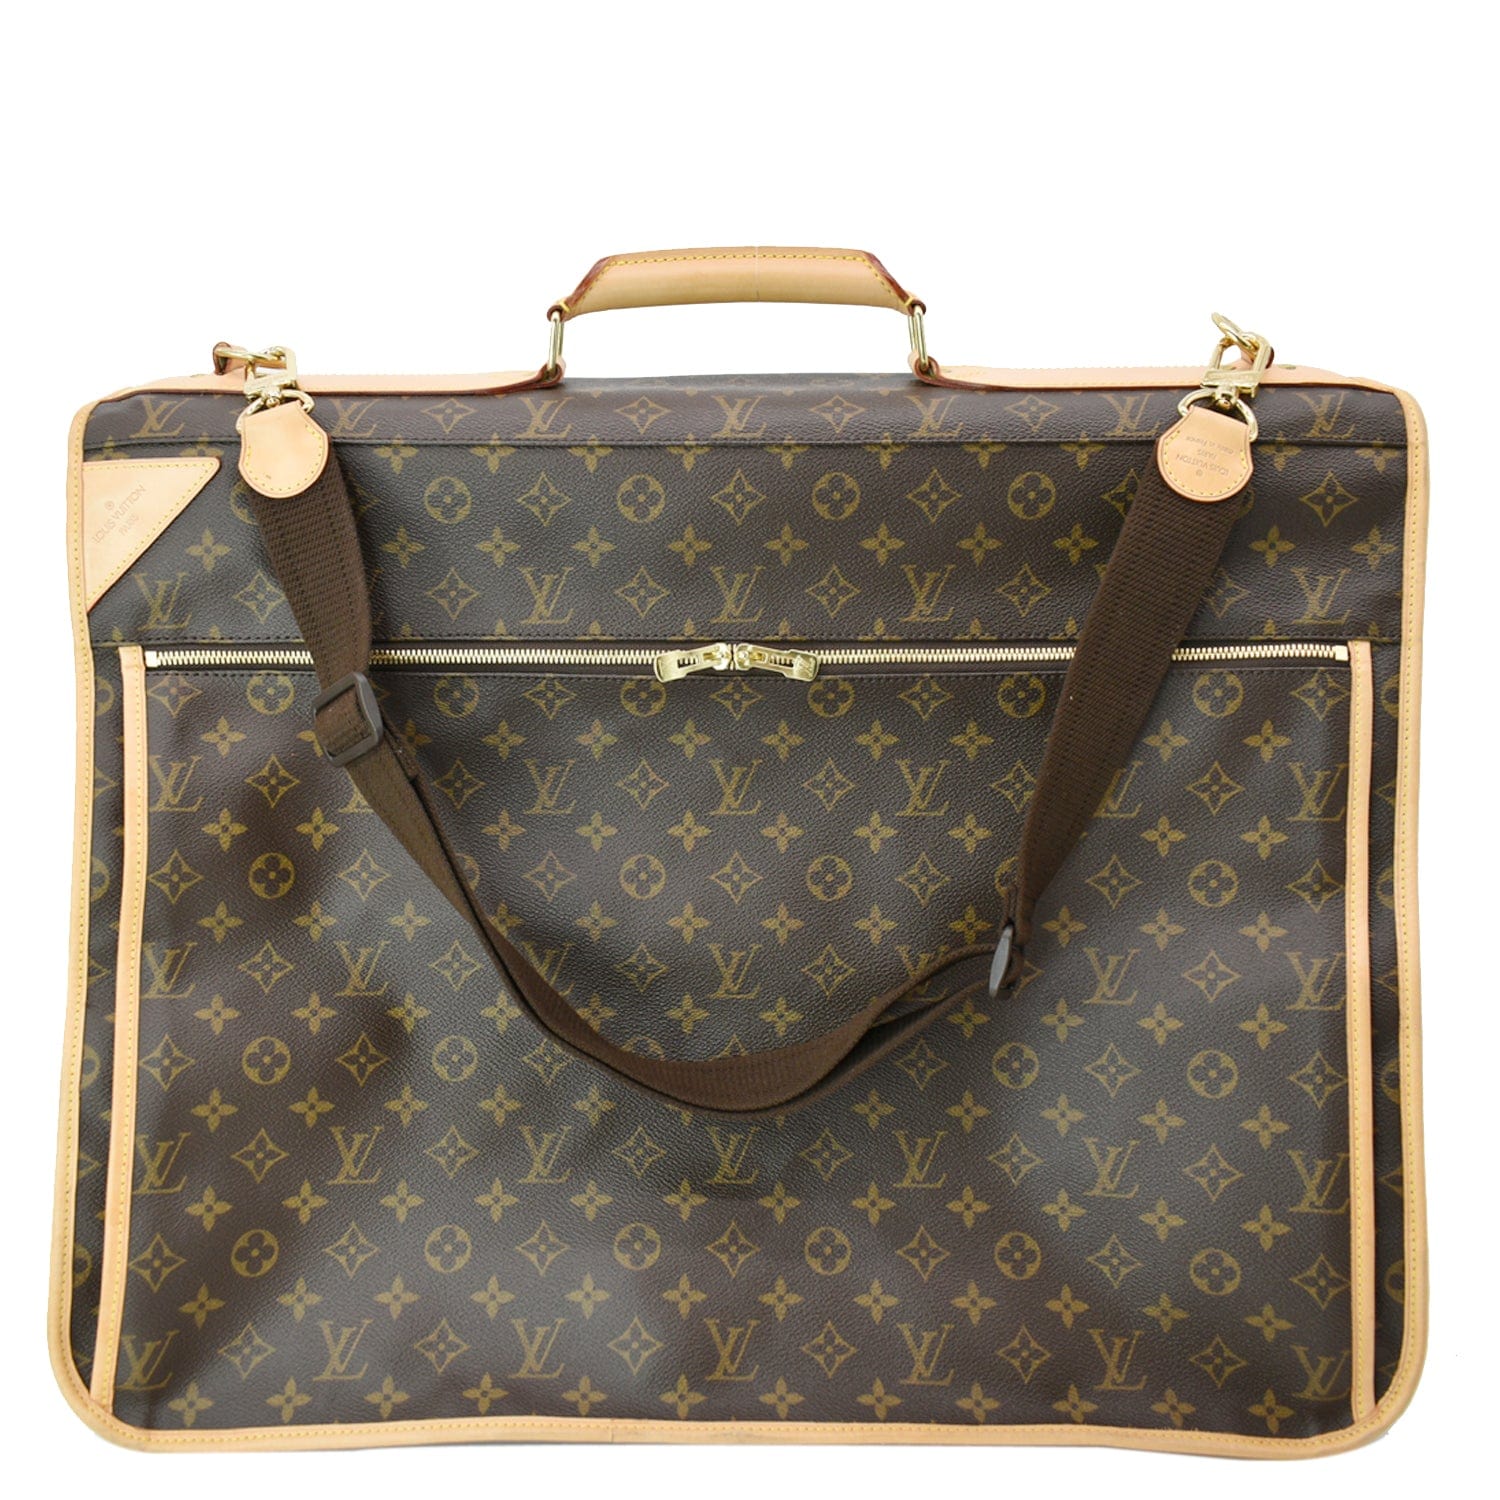 Womens Authentic Louis Vuitton Brown Bag - clothing & accessories